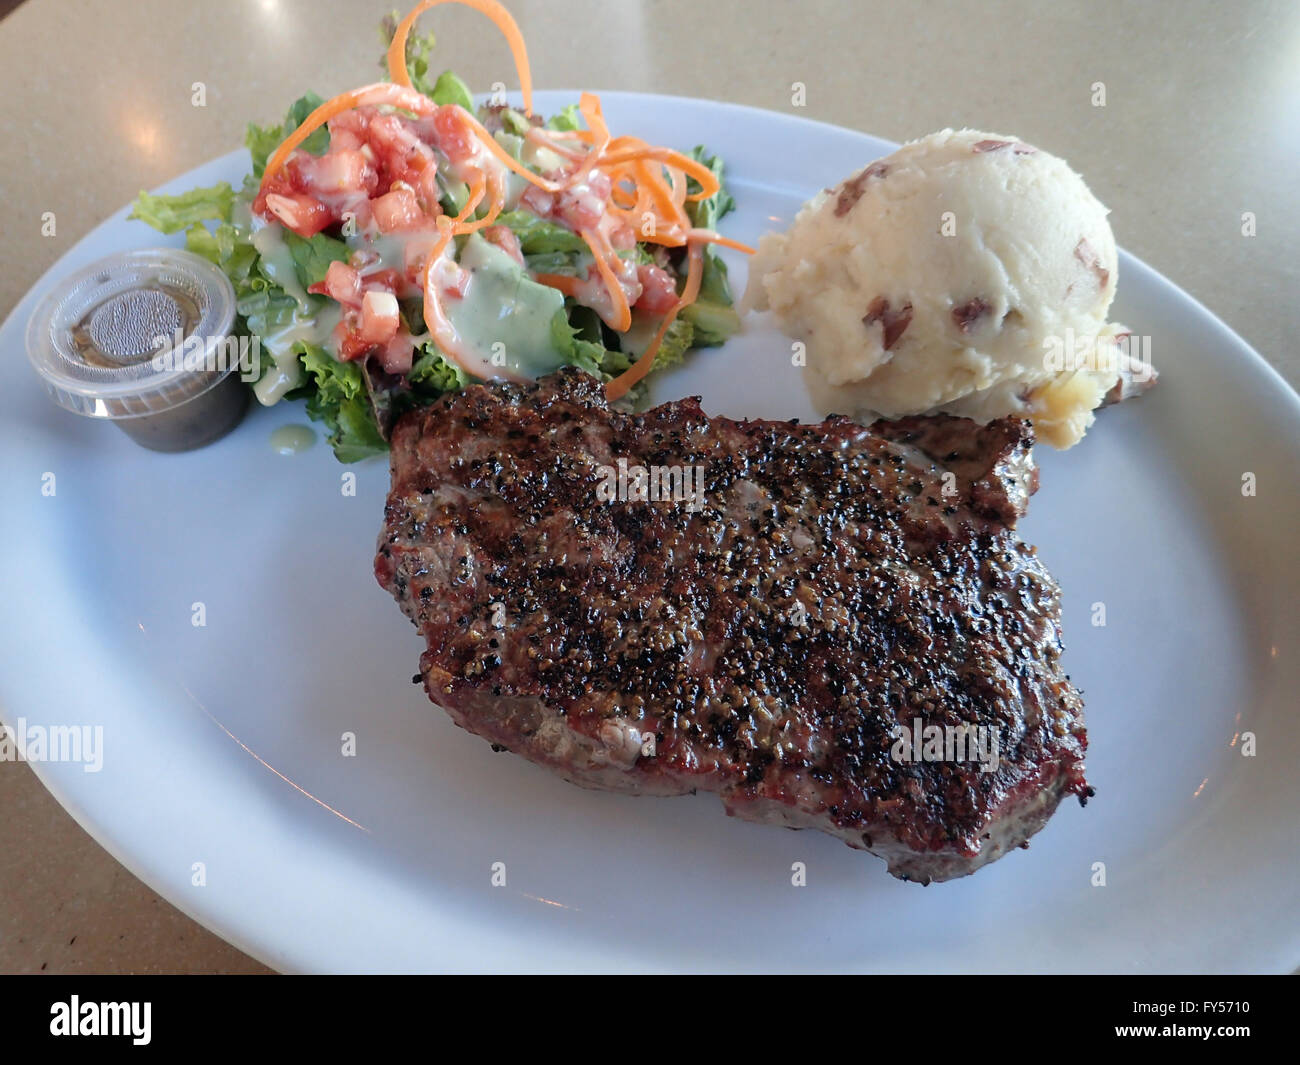 New York Steak, Mashed Potato, and Salad on white plate with dressing on a table. Stock Photo